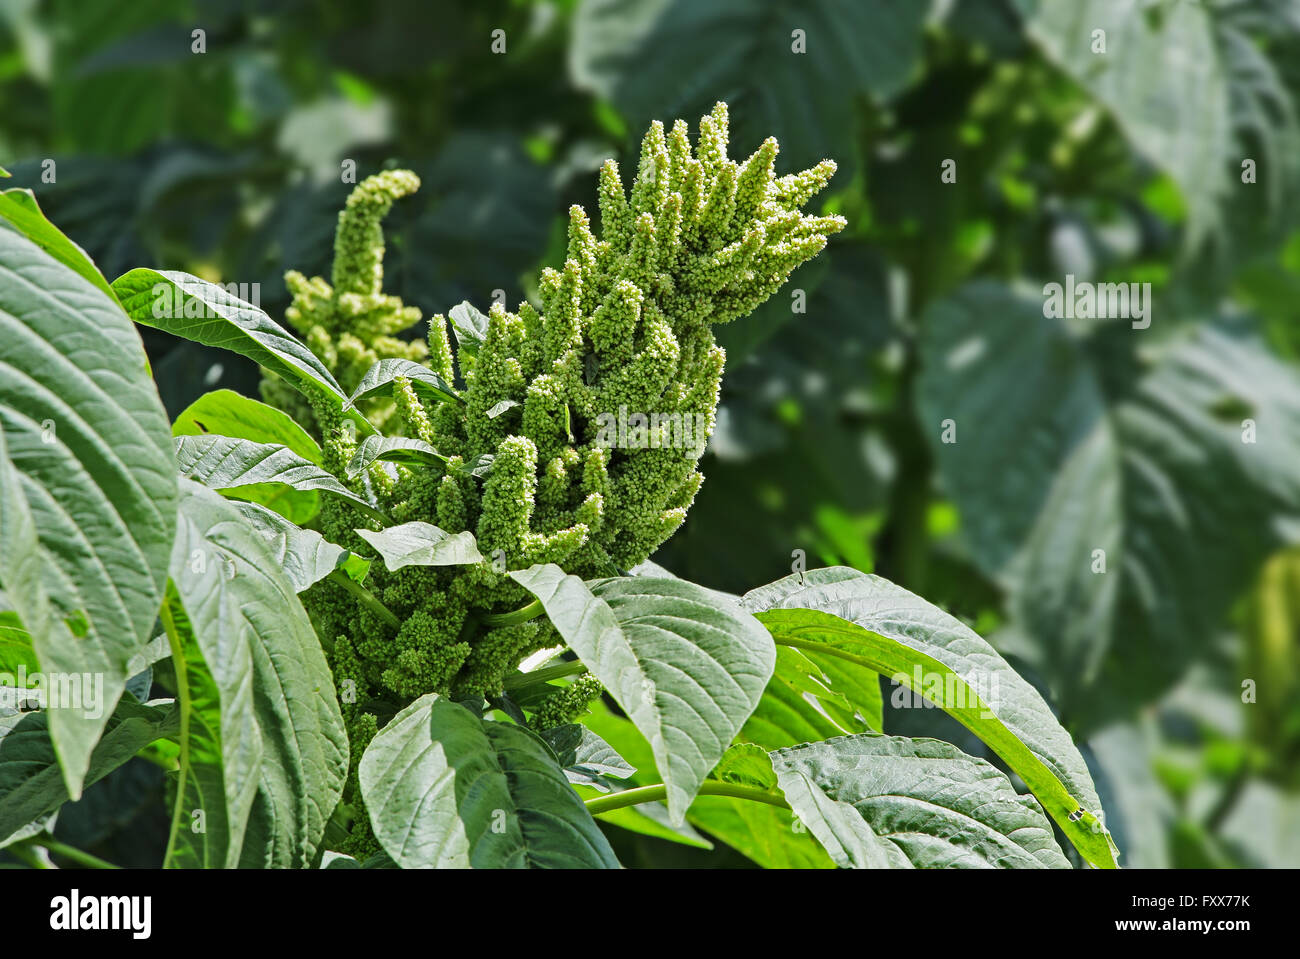 Indian Green Amaranth Plant. Genus Amaranthus. Cultivated as leaf vegetables, cereals and ornamental plants. Stock Photo